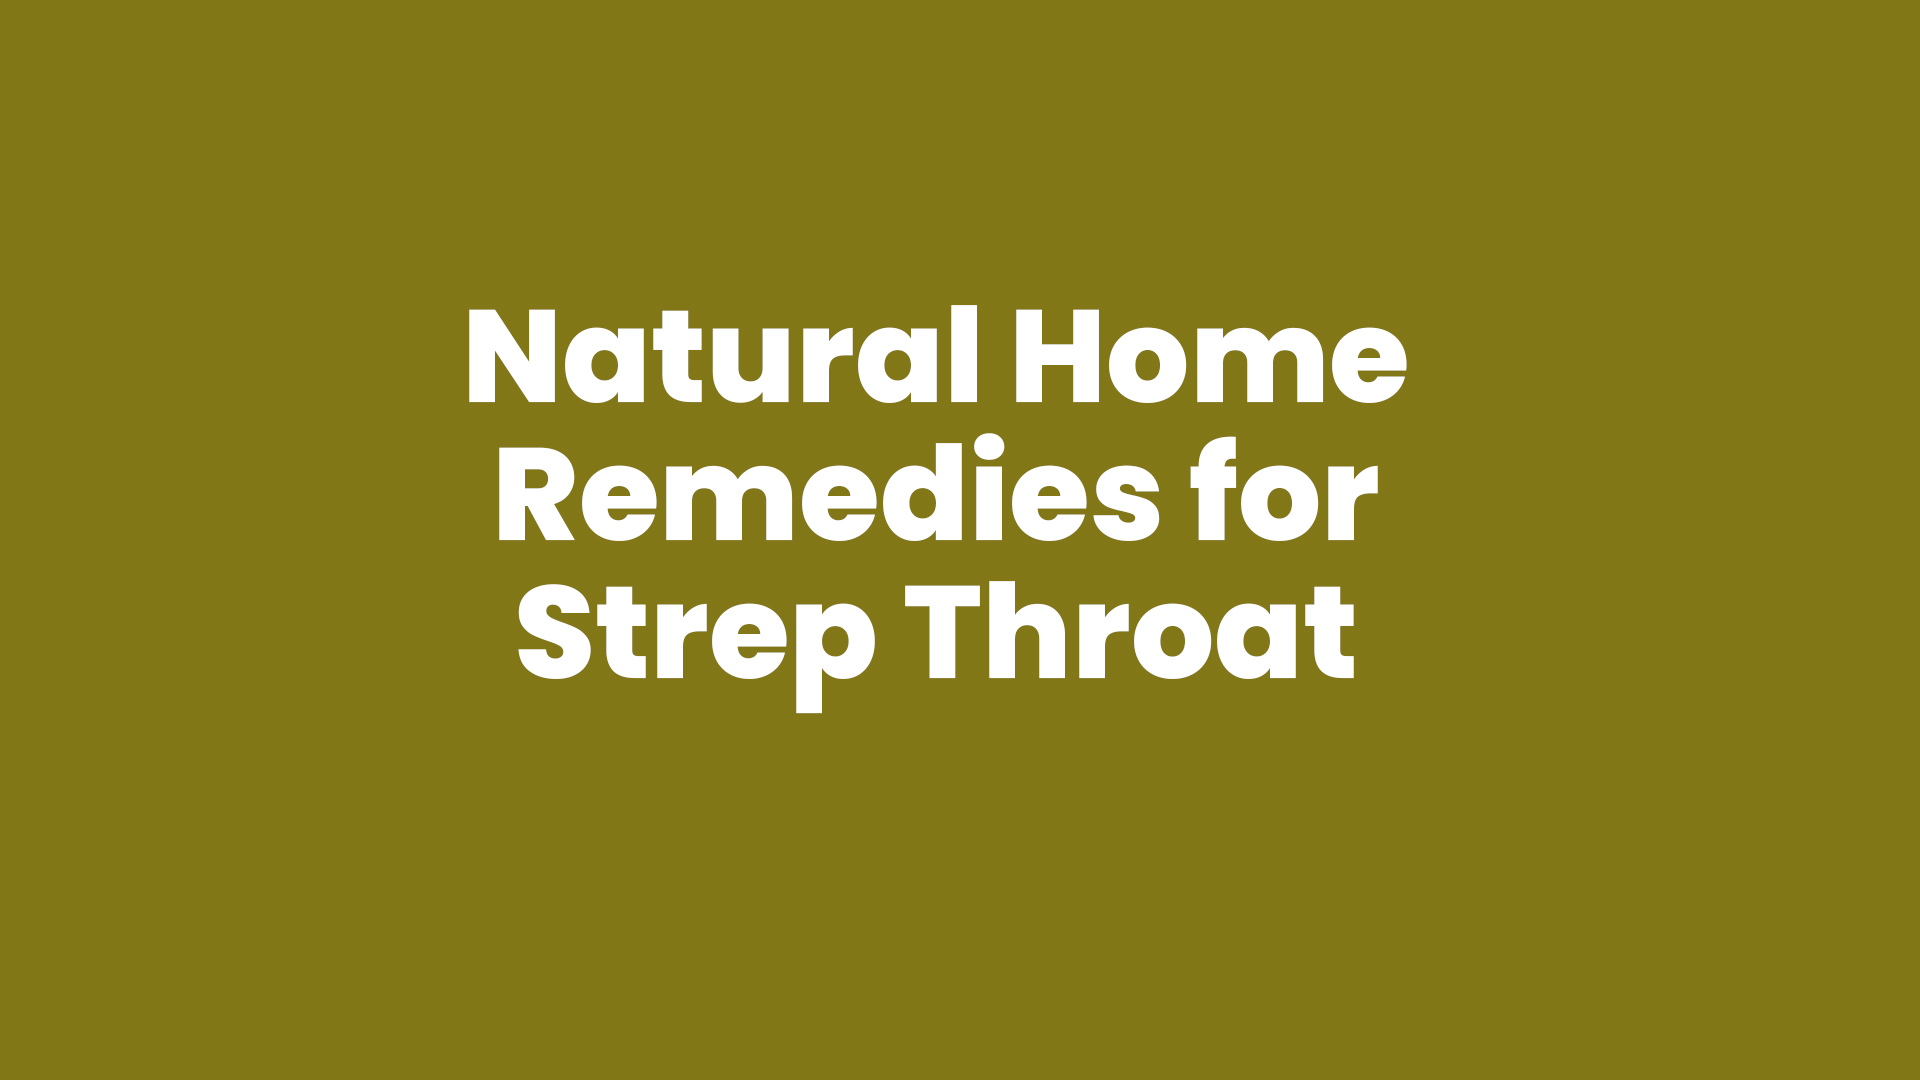 Natural Home Remedies for Strep Throat